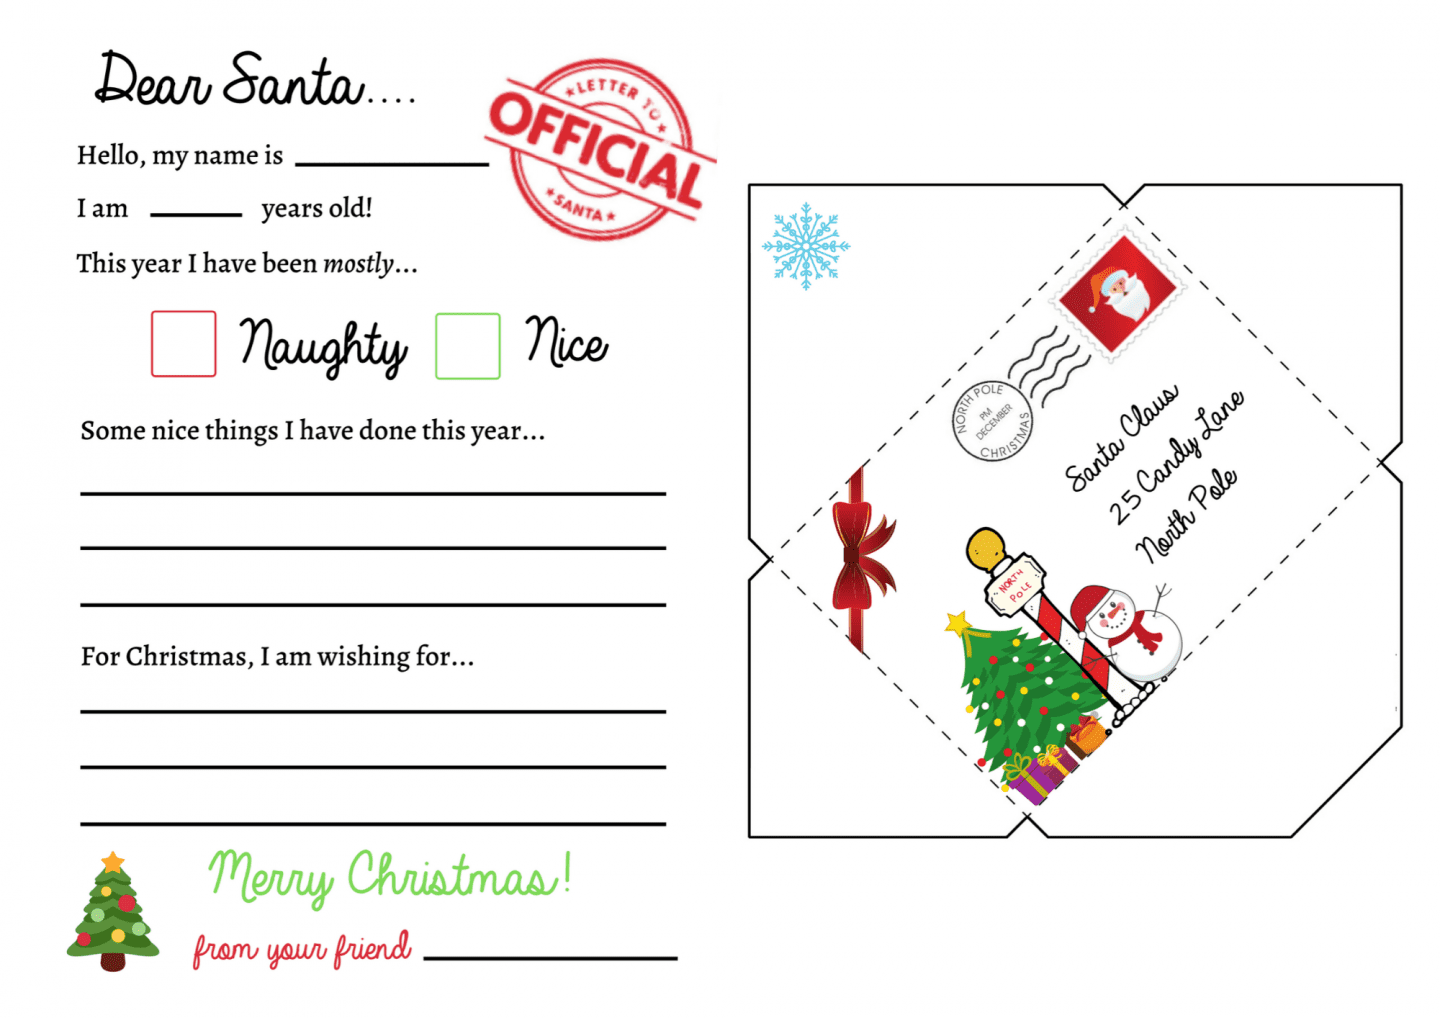 This 'Dear Santa' Letter Templates Resource Pack contains some handy ideas for inspiring writing letters to Santa over the festive season.